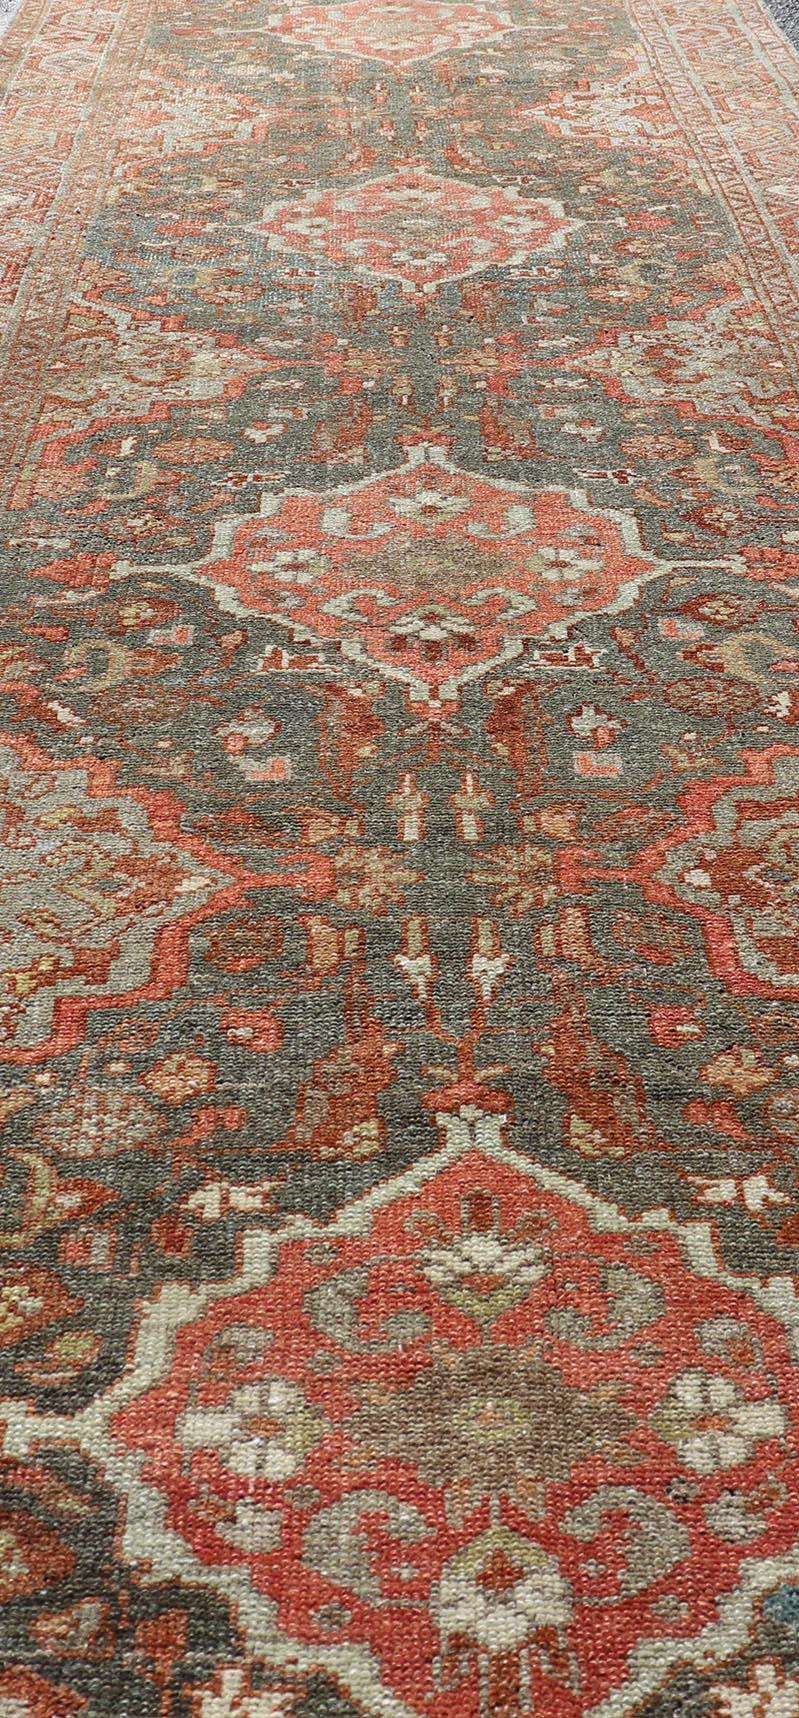 20th Century Antique Persian Malayer Runner with All-Over Floral Medallions Design